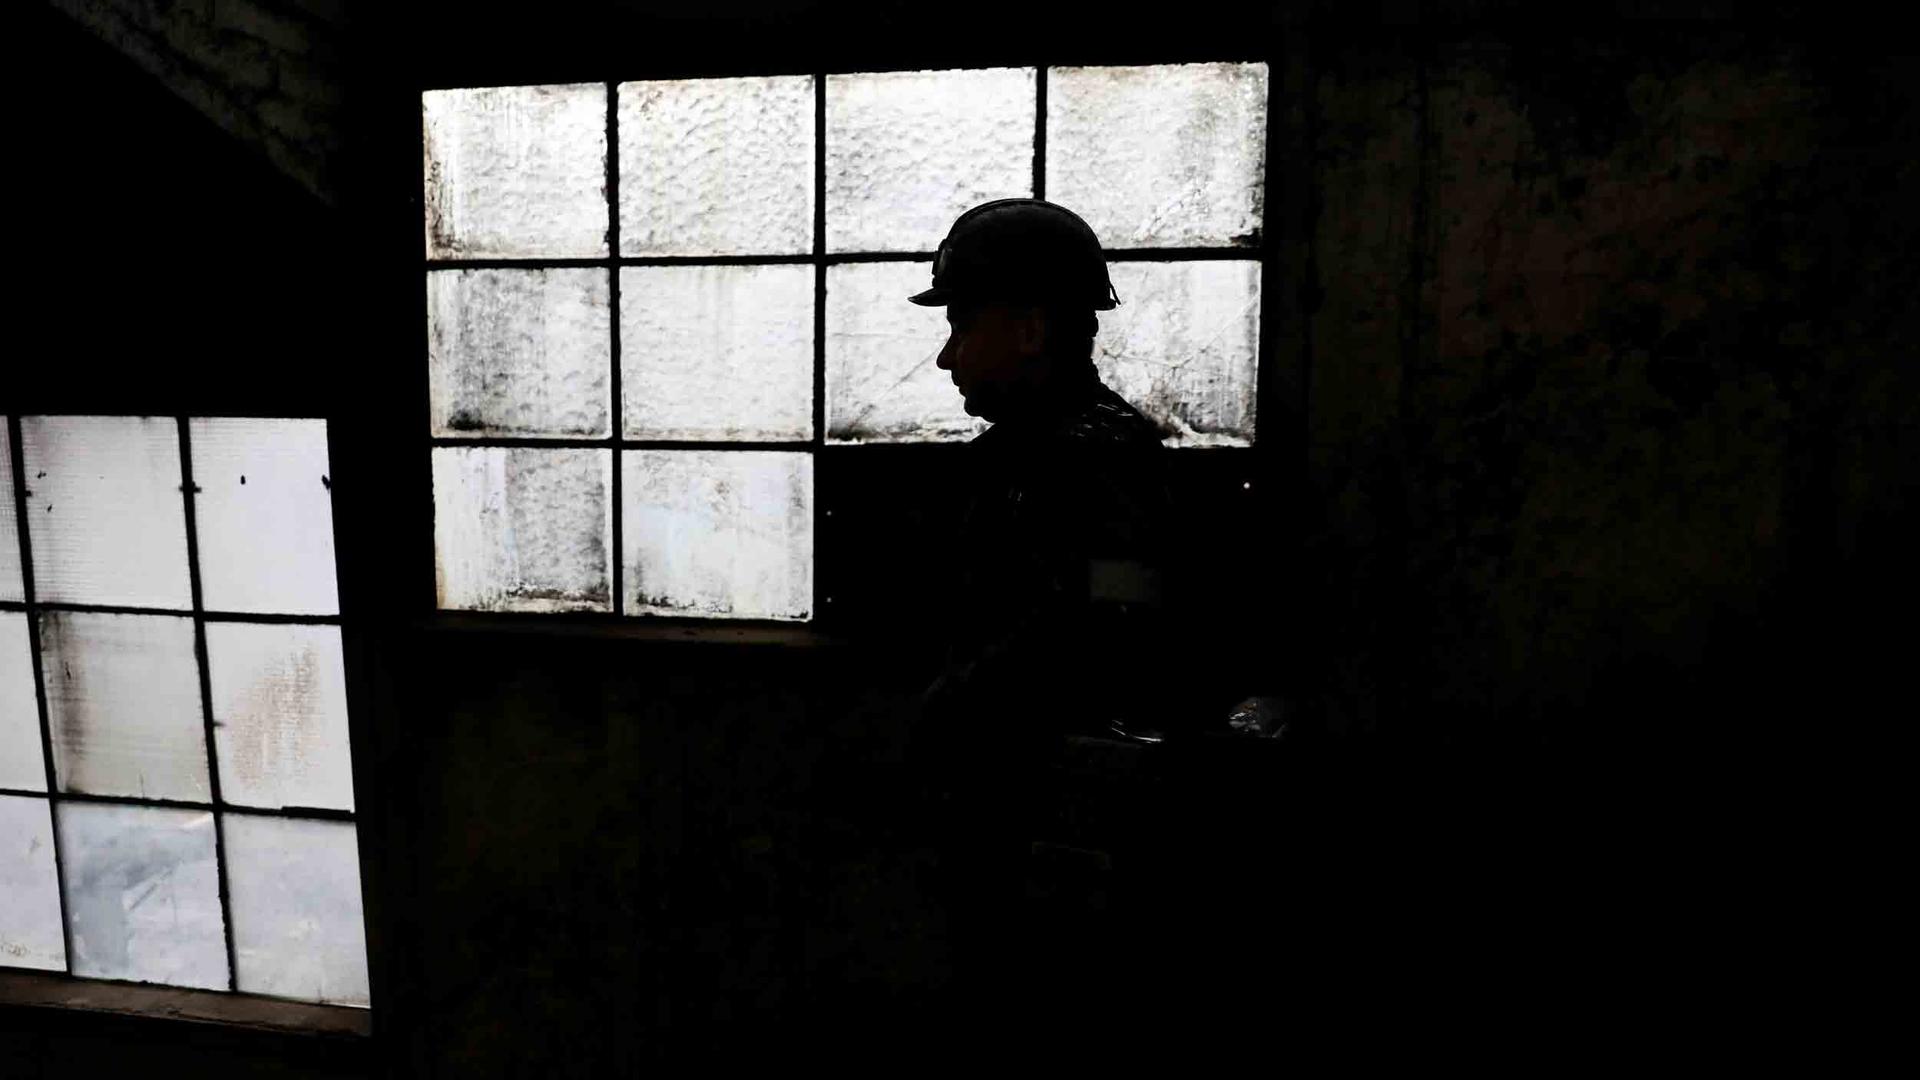 A man wearing a hard hat is silhouetted against old heavy windowpanes in a factory.